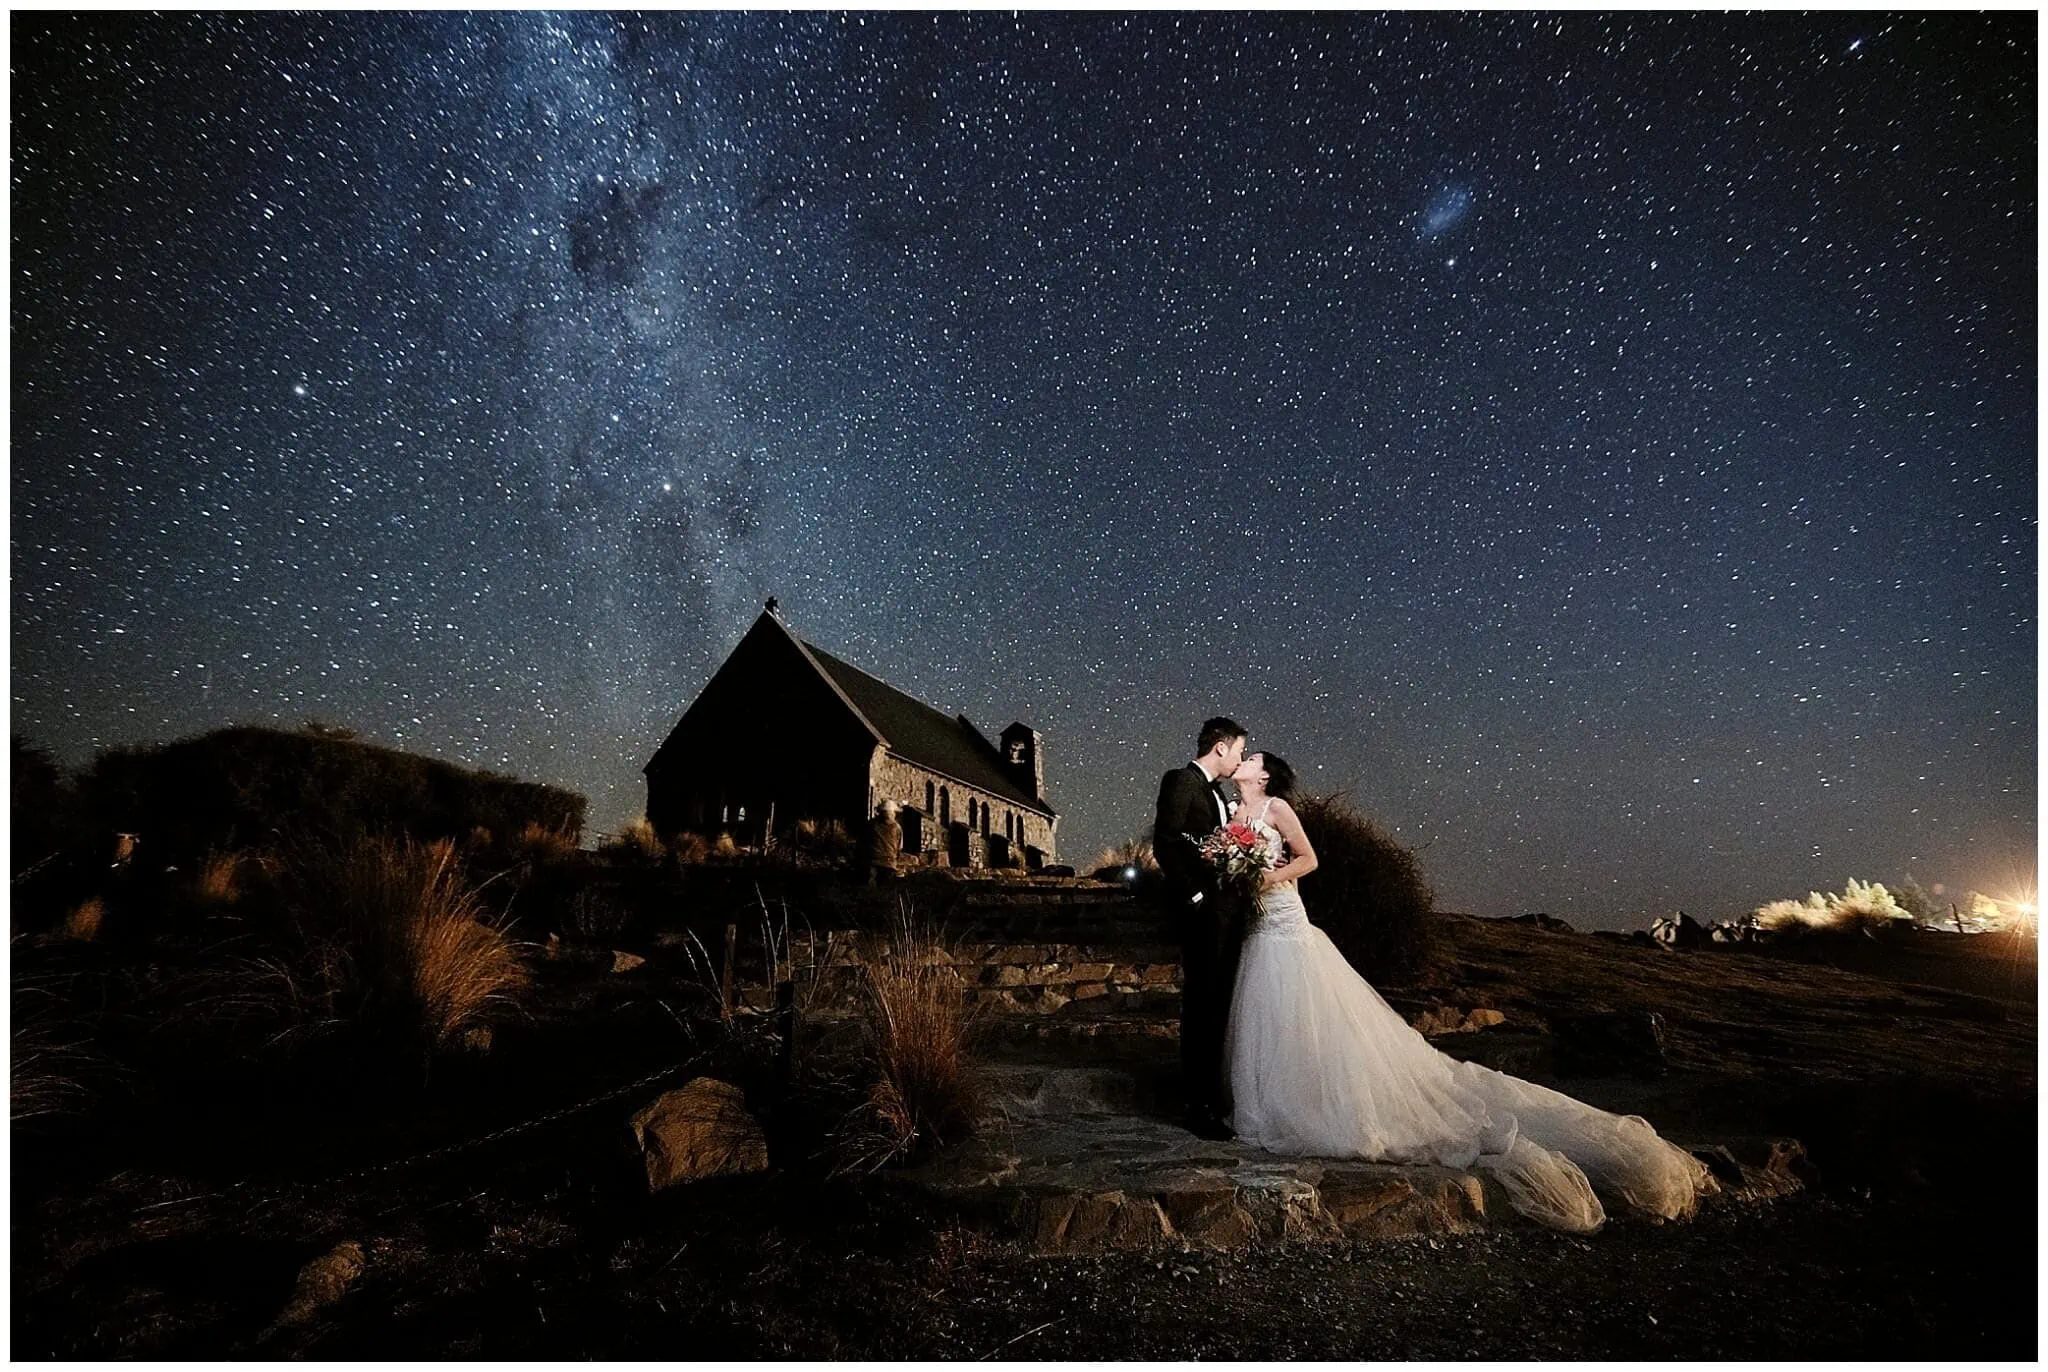 Queenstown New Zealand Elopement Wedding Photographer - A bride and groom standing under the starry milky way in front of a church for their shoot portfolio.